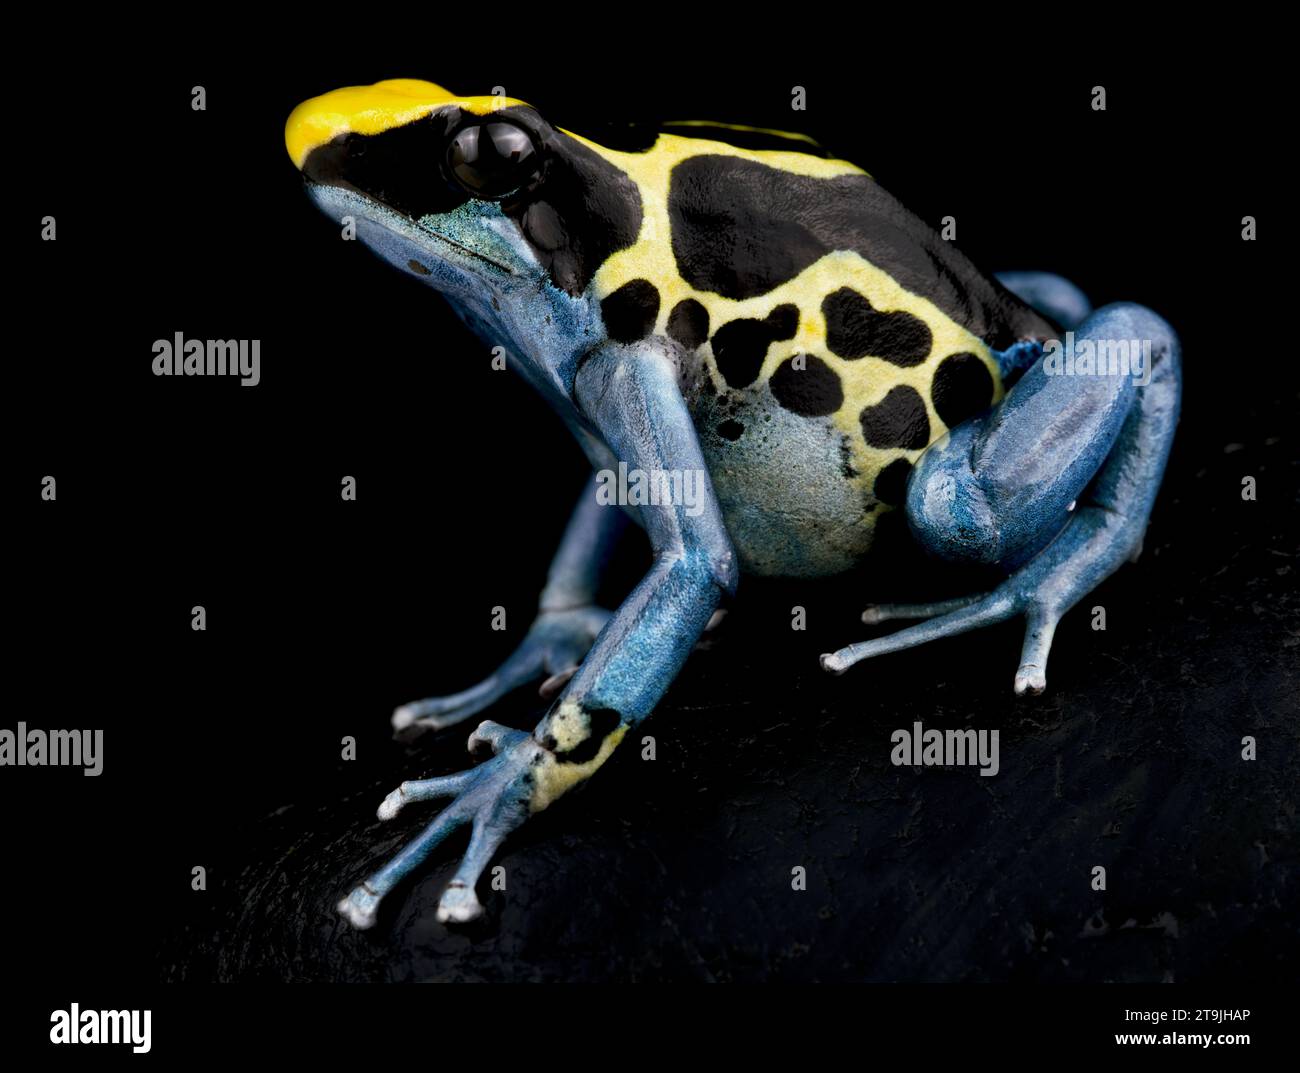 The Dyeing dart frog (Dendrobates tinctorius) is a big, colorful frog species from the Guiana shield in South America. Stock Photo